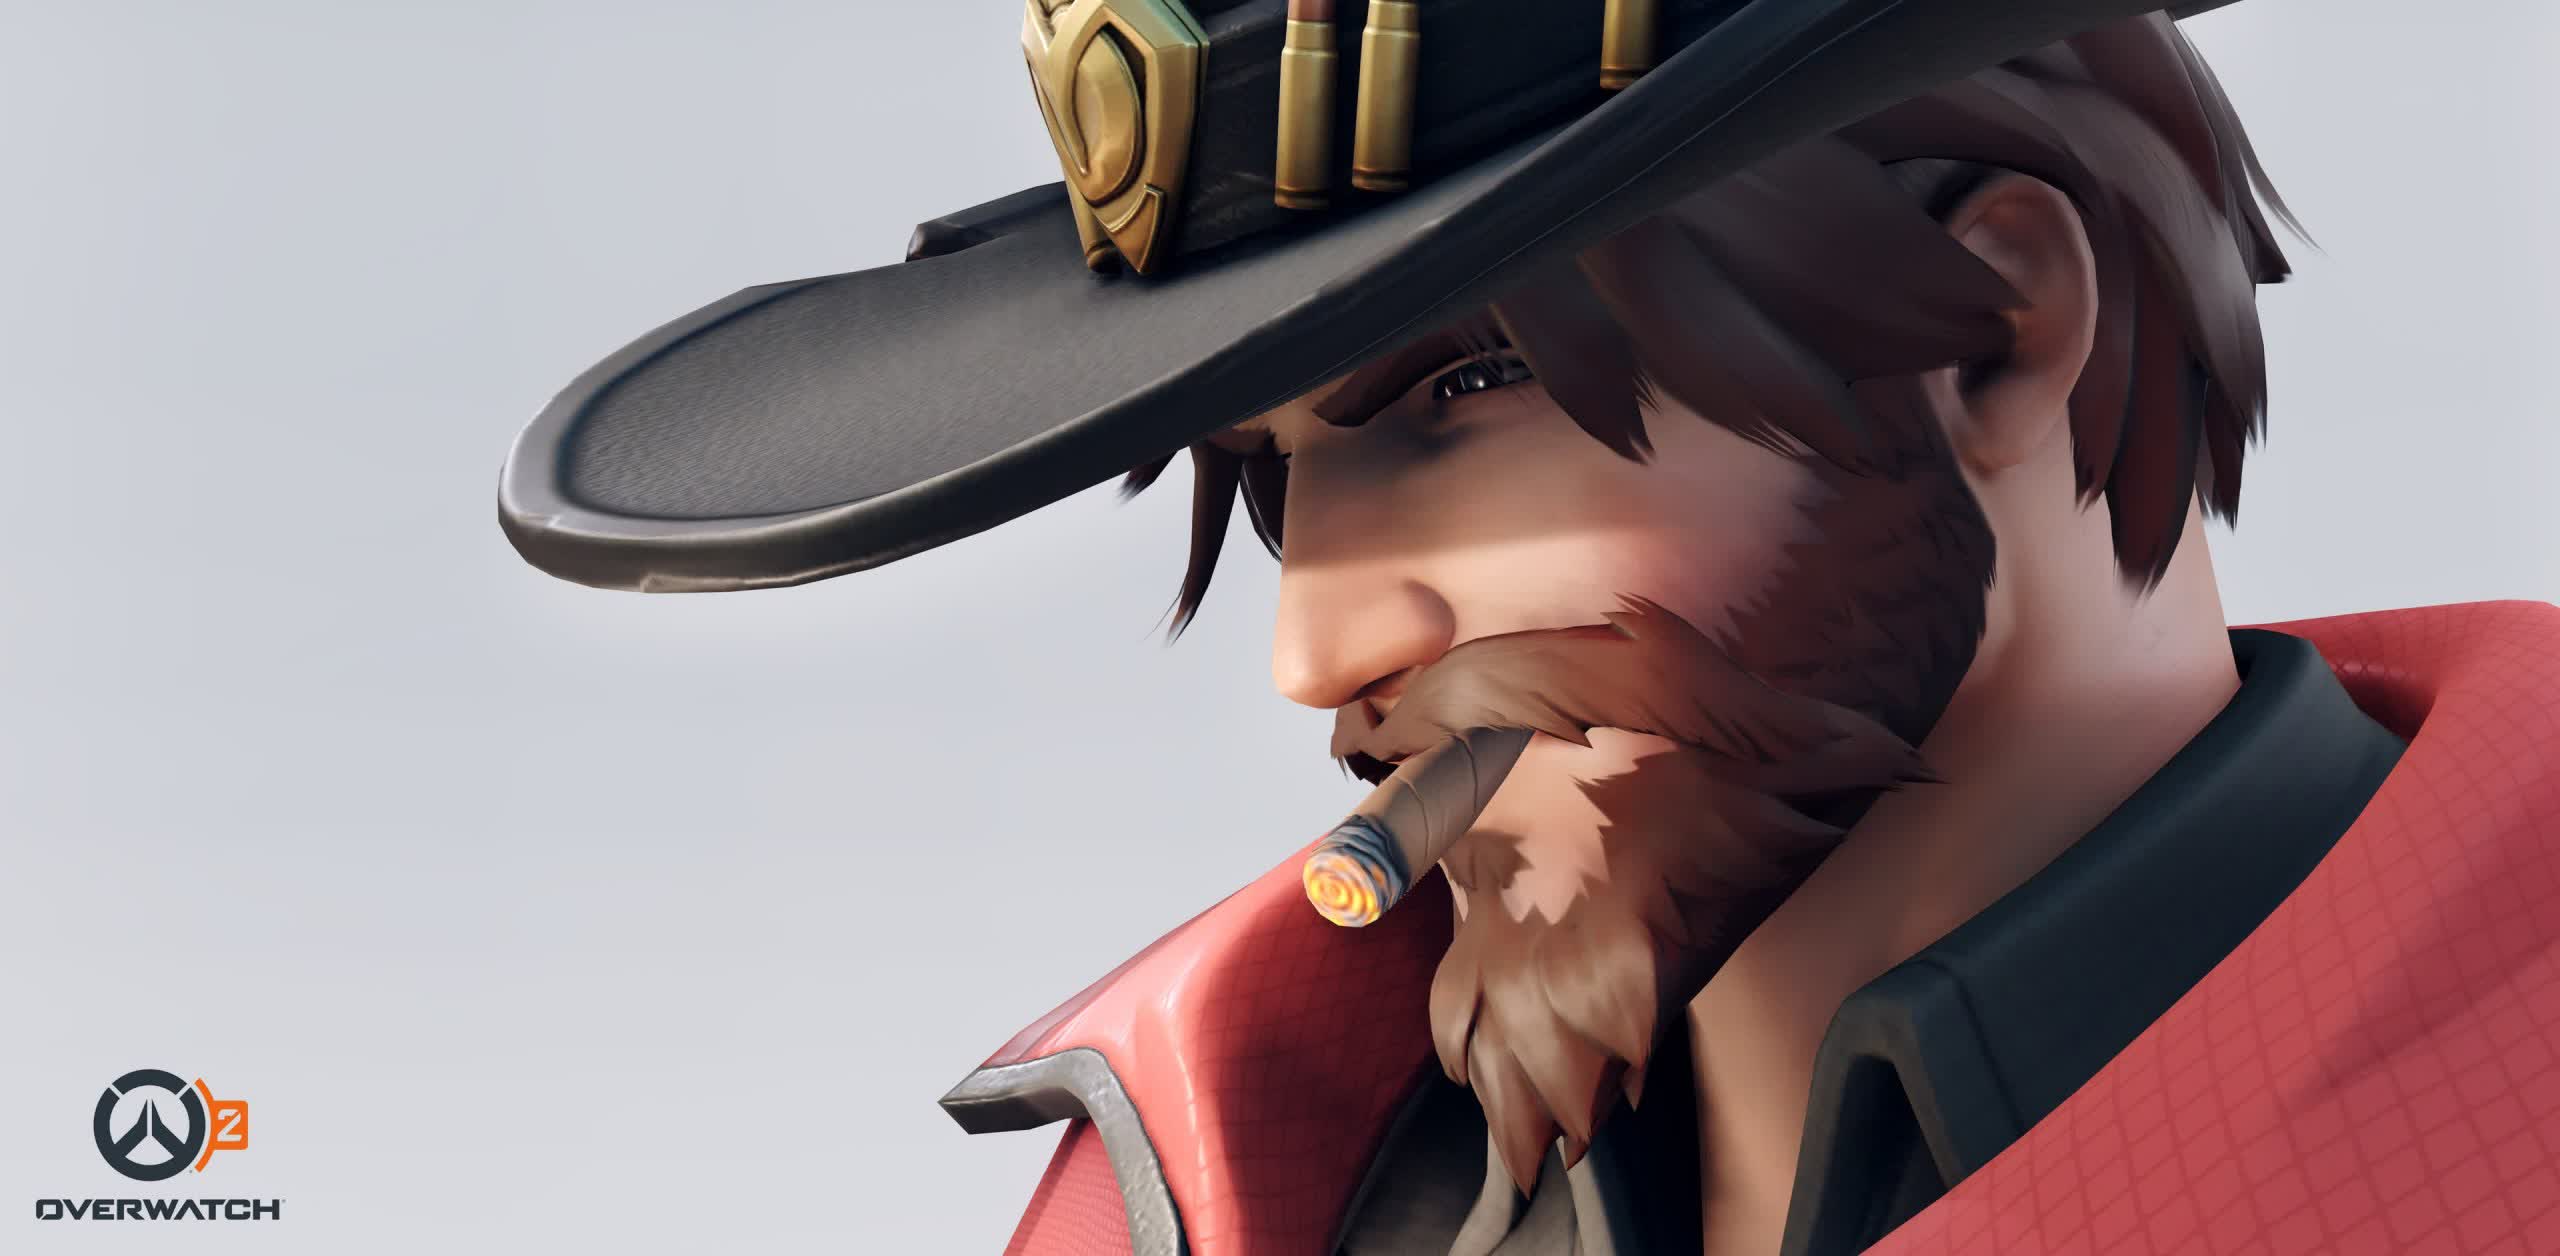 Overwatch's McCree is now Cole Cassidy